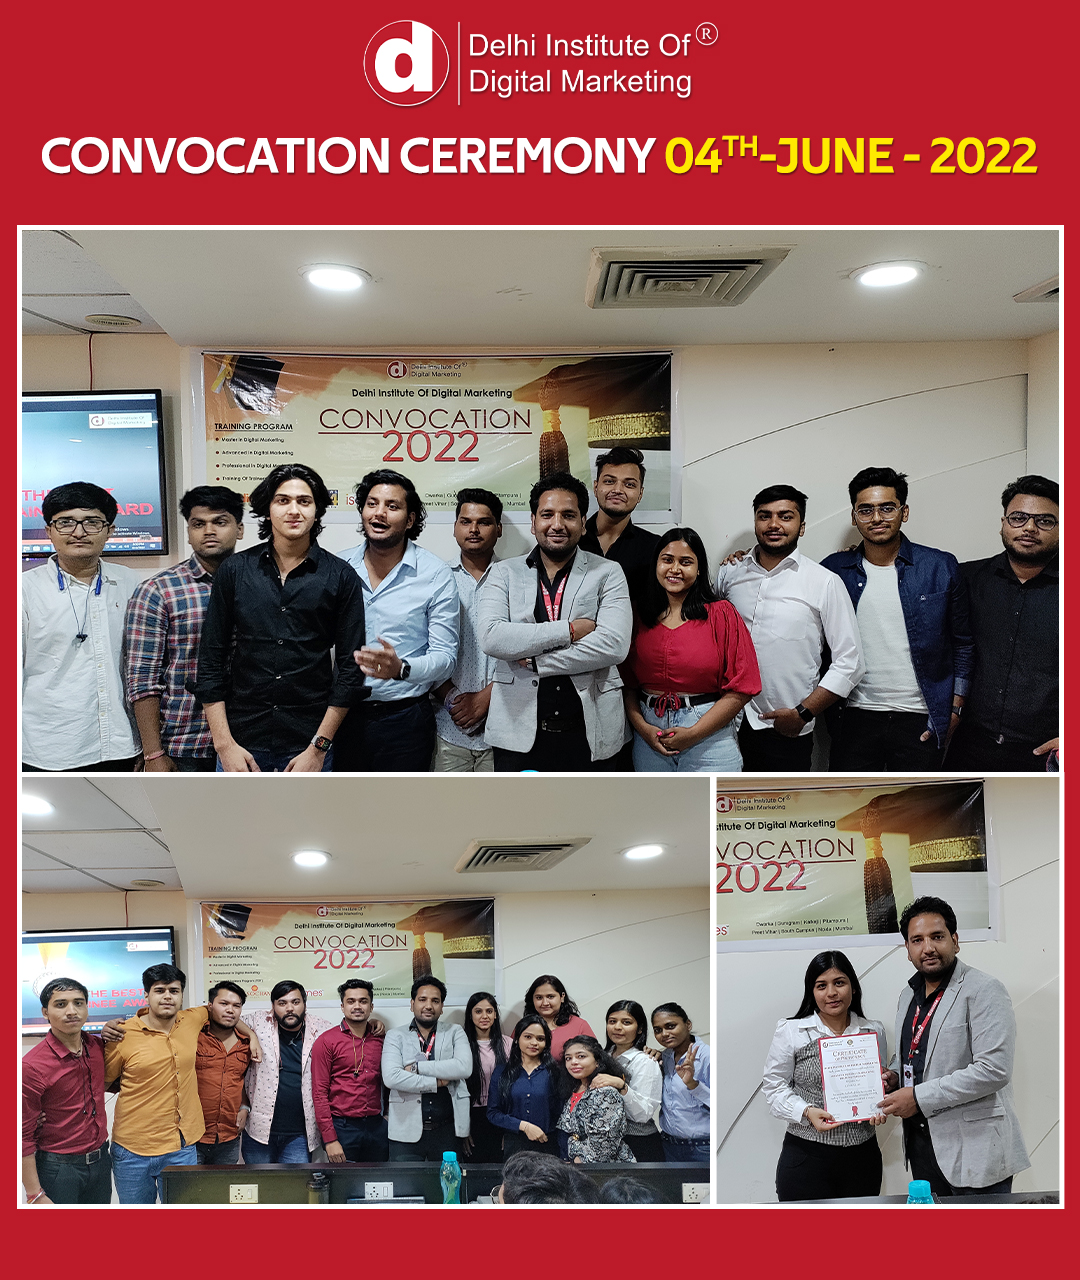 DIDM convocation ceremony for the month of June